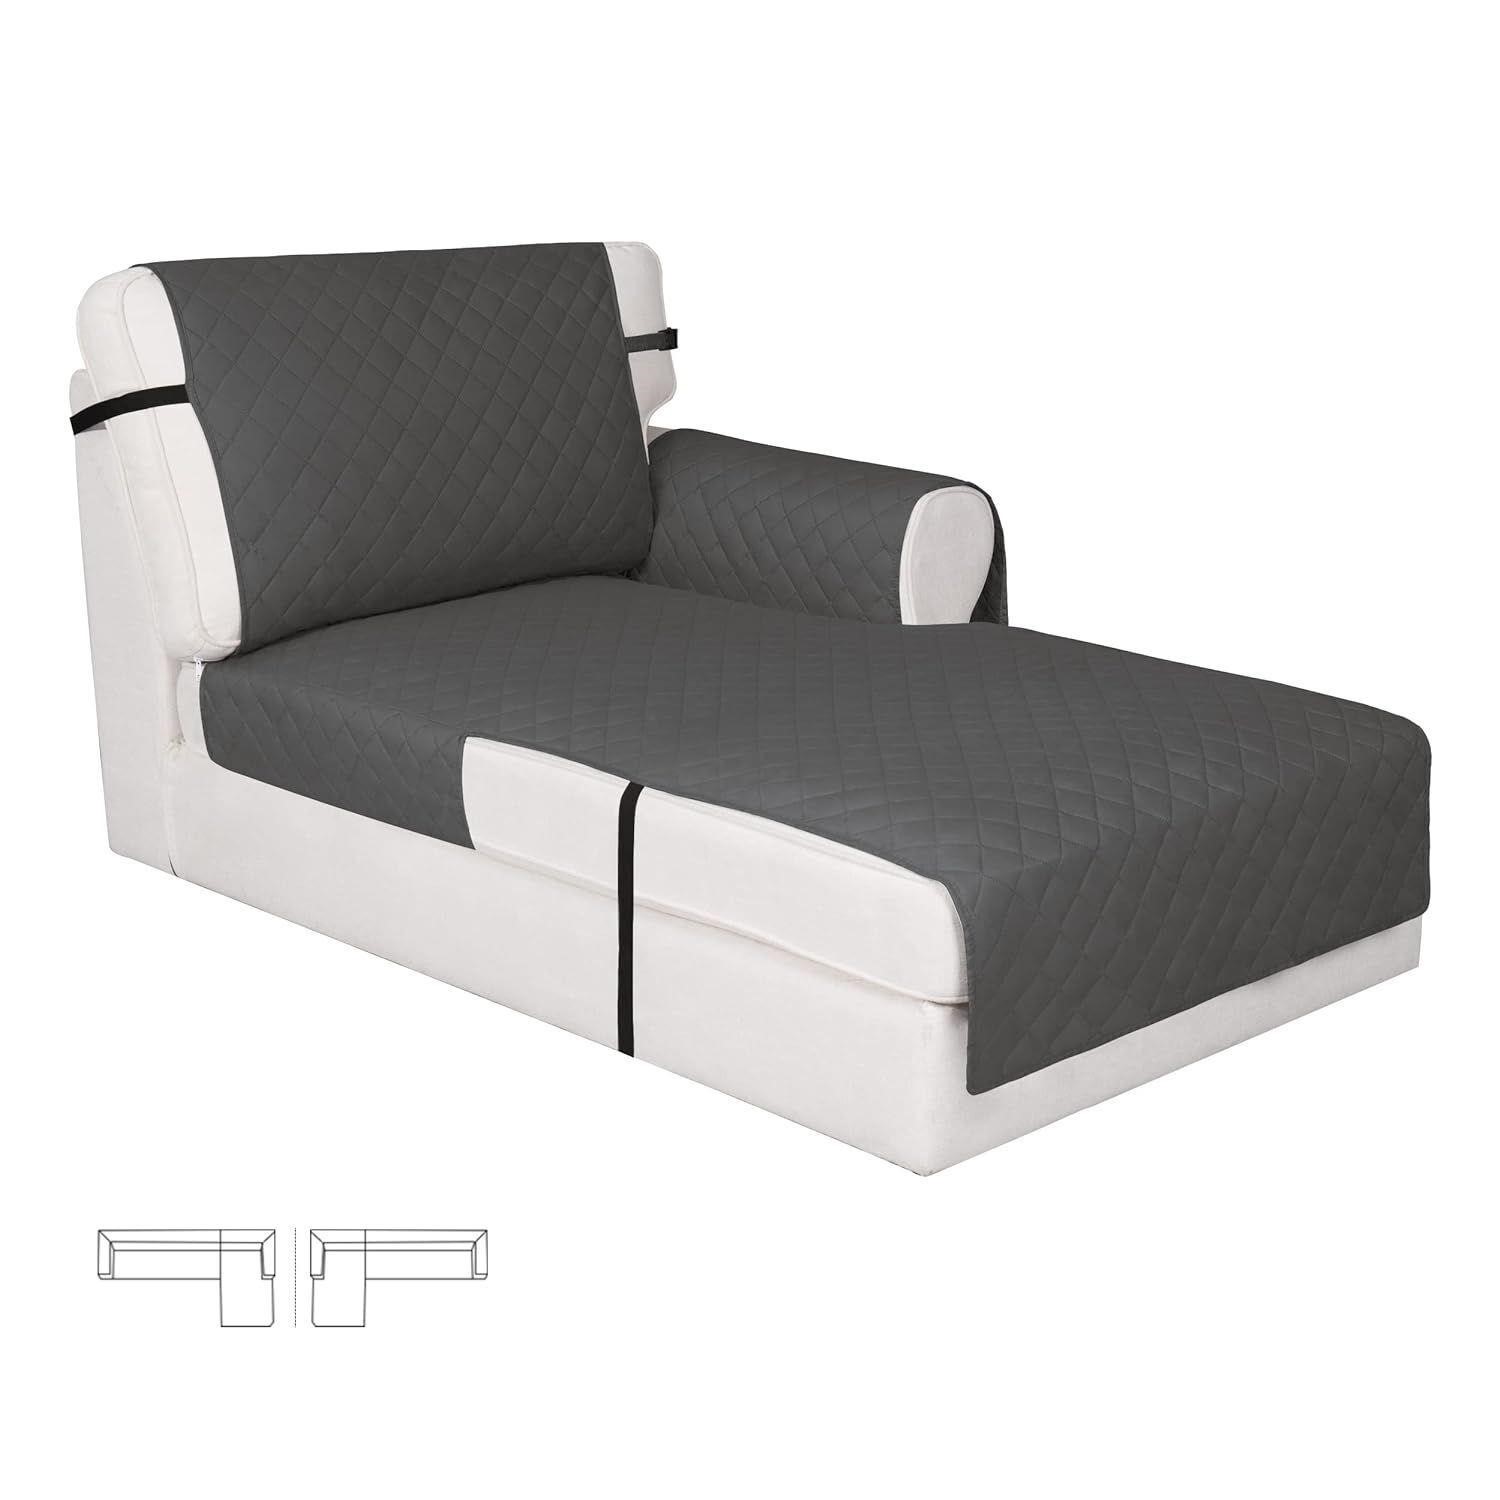 Easy-Going Reversible Chaise Lounge Couch Cover